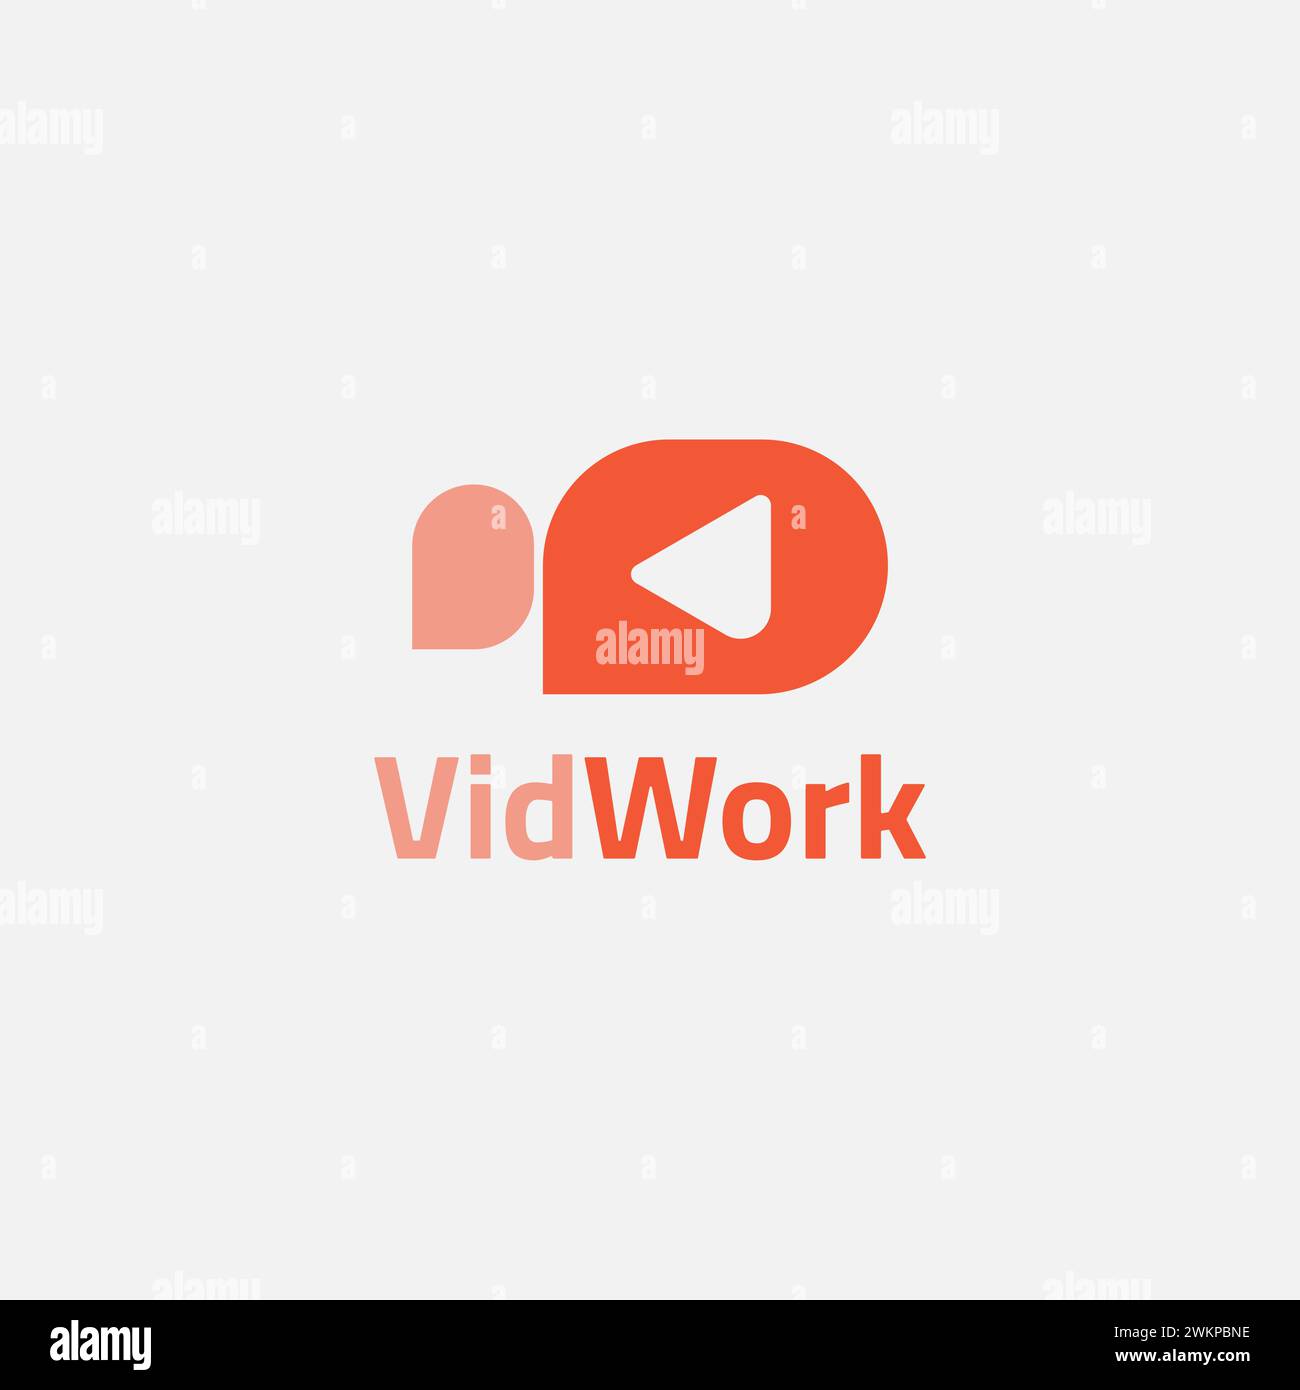 Video conference app logo in faded red and red. Stock Vector